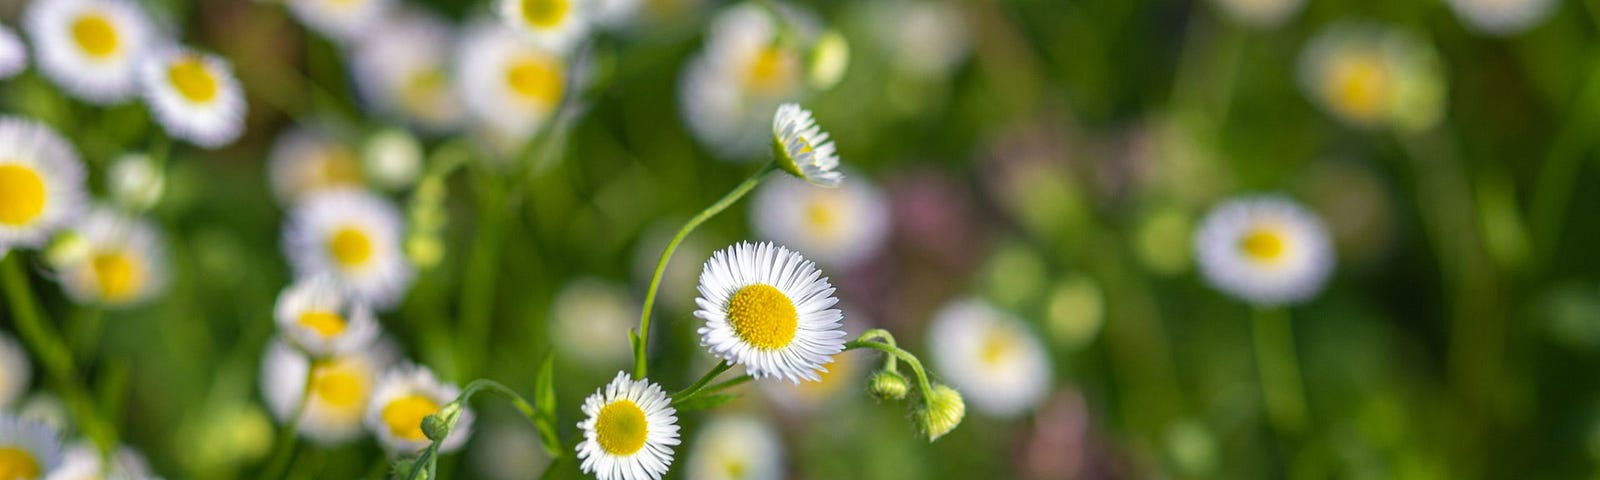 Fleabane, a native North American native plant that is good for pollinators. Photo by Lasclay on Unsplash